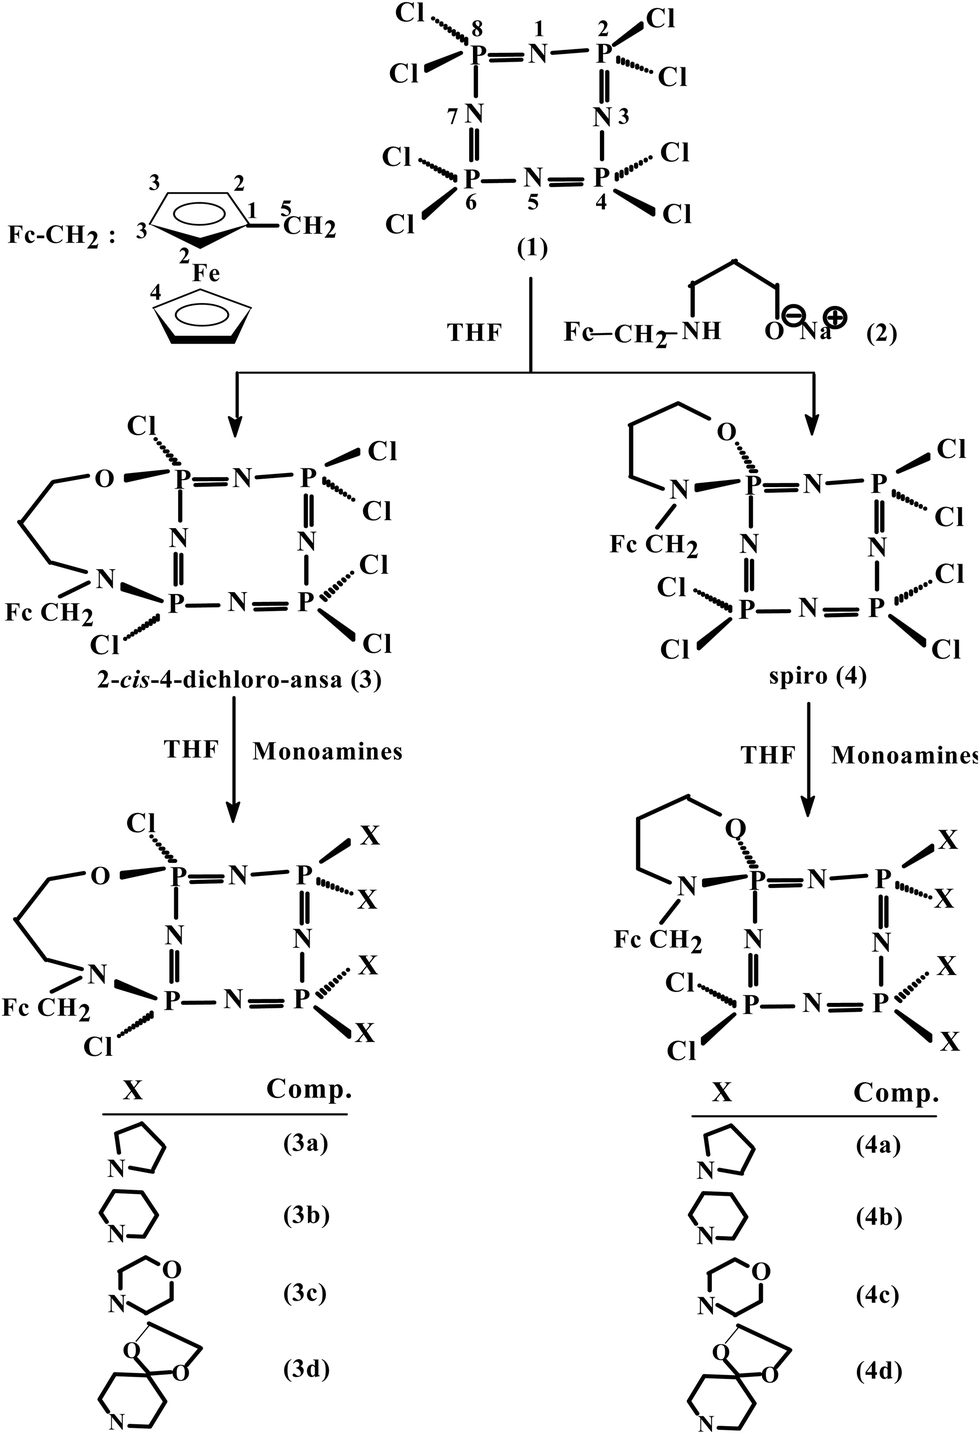 Phosphorus Nitrogen Compounds Part 42 The Comparative Syntheses Of 2 Cis 4 Ansa N O And Spiro N O Cyclotetraphosphazene Derivatives Spectroscop New Journal Of Chemistry Rsc Publishing Doi 10 1039 C9njc